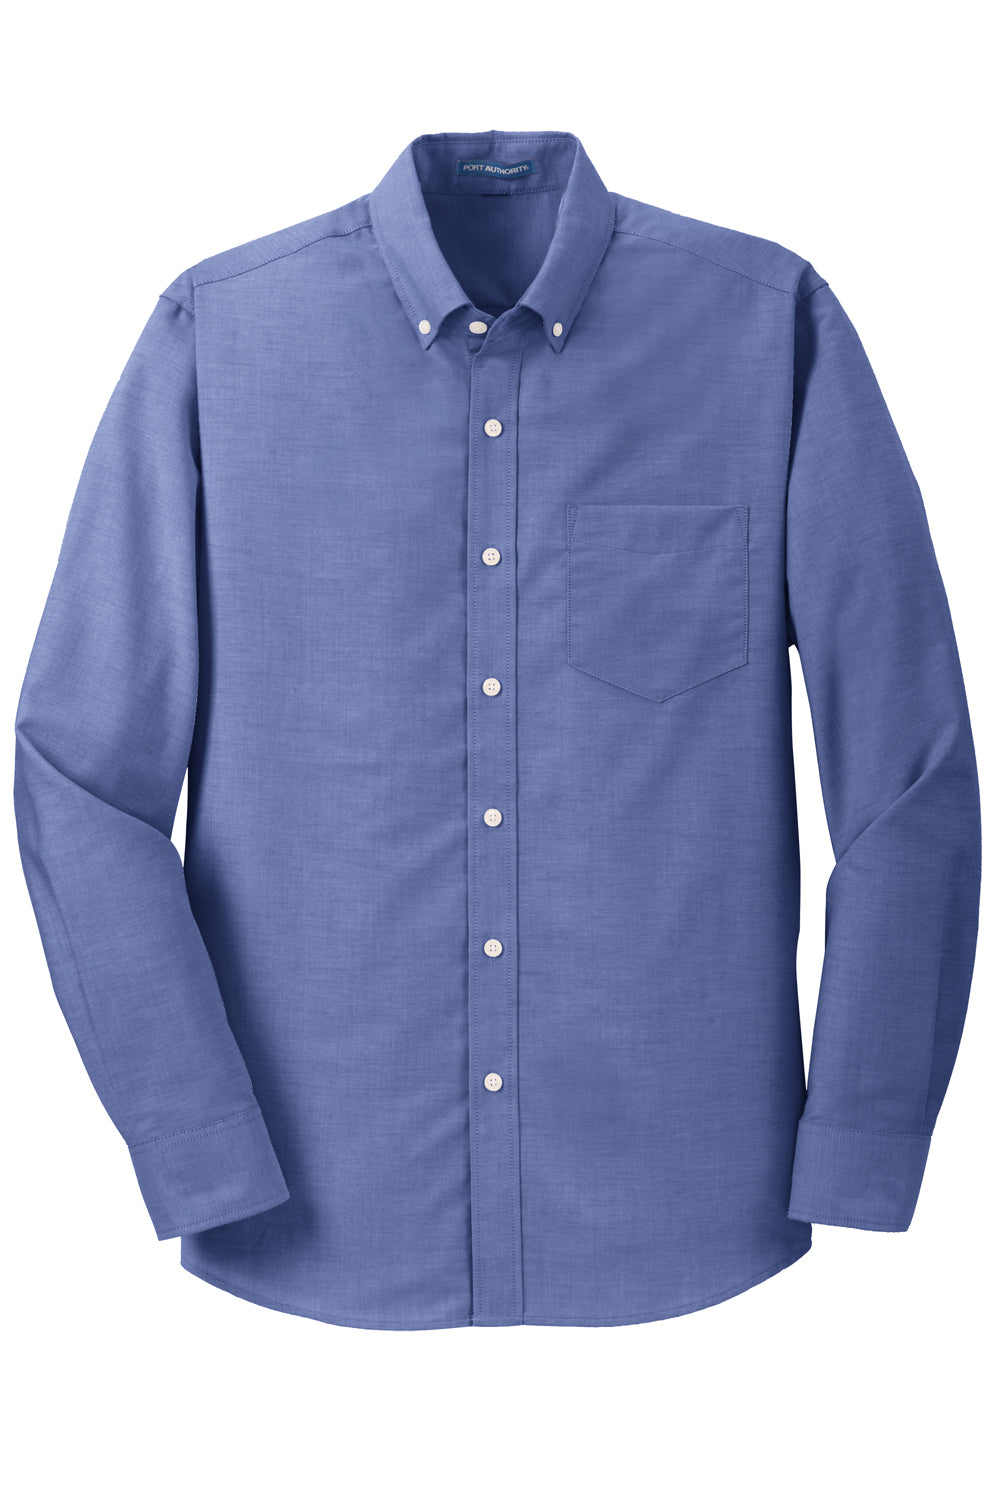 Port Authority S658/TS658 SuperPro Oxford Wrinkle Resistant Long Sleeve Button Down Shirt w/ Pocket Navy Blue Flat Front